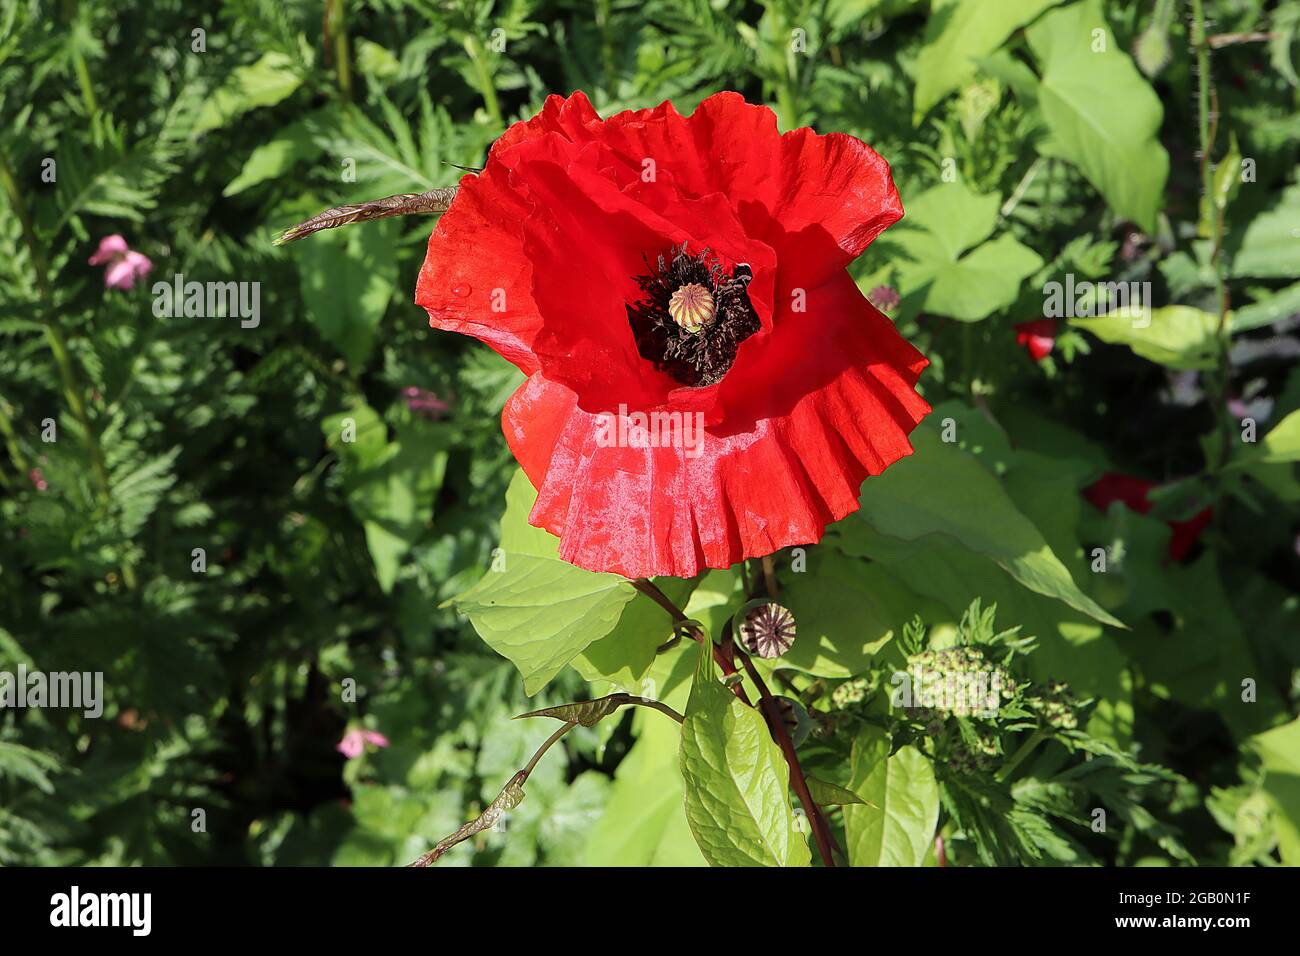 Papaver rhoeas common poppy – red flowers with creased petals on hairy wiry stems,  June, England, UK Stock Photo